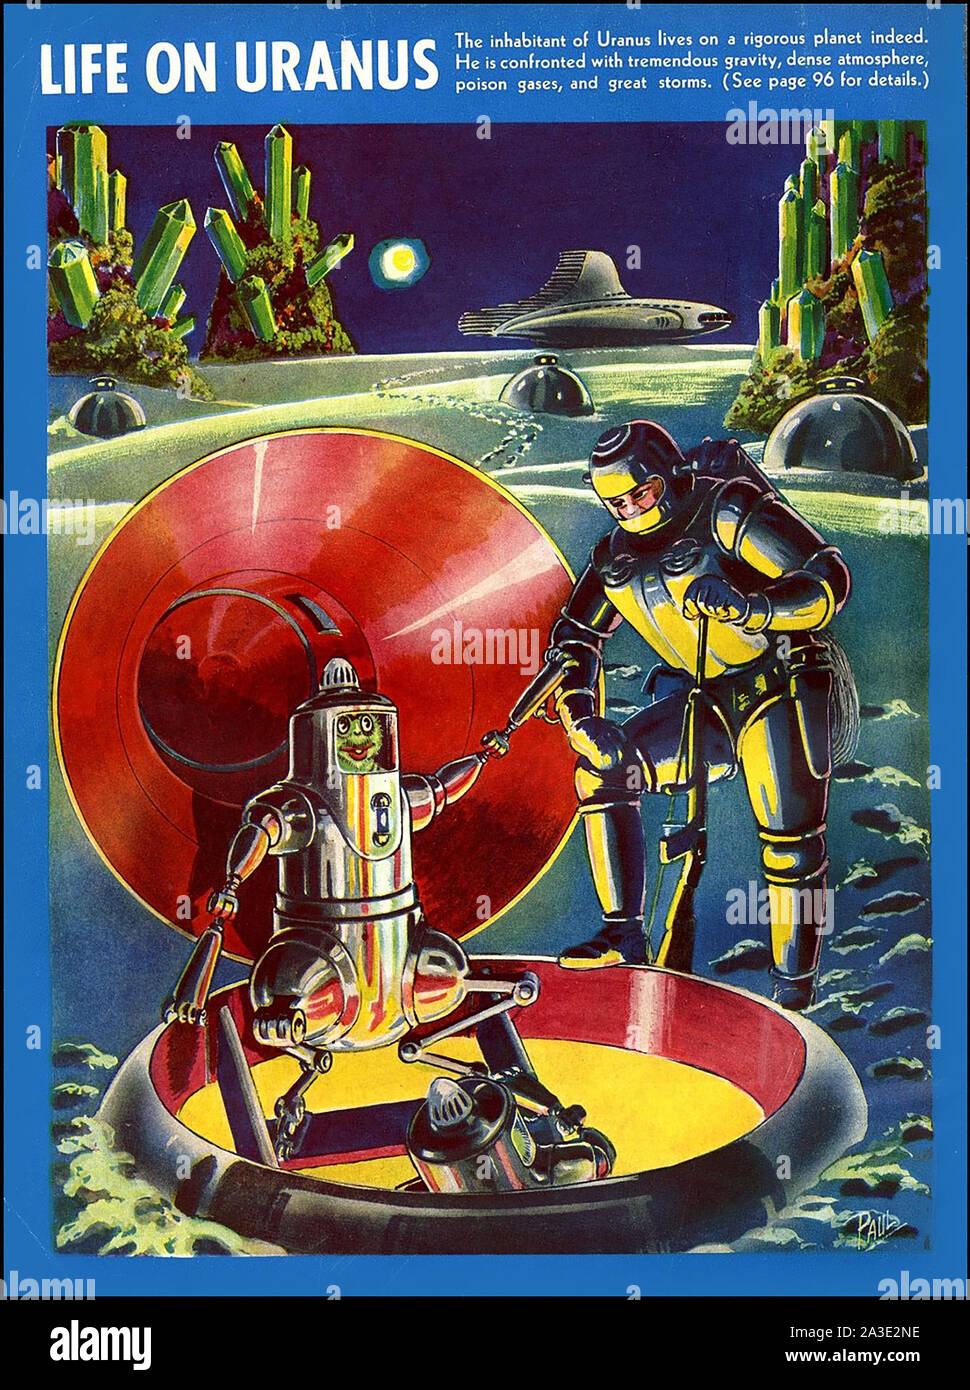 FANTASTIC ADVENTURES American sci-fi magazine back cover April 1940. Illustration for the story Life on Uranus by Frank R. Paul drawn by James Allen St. John Stock Photo